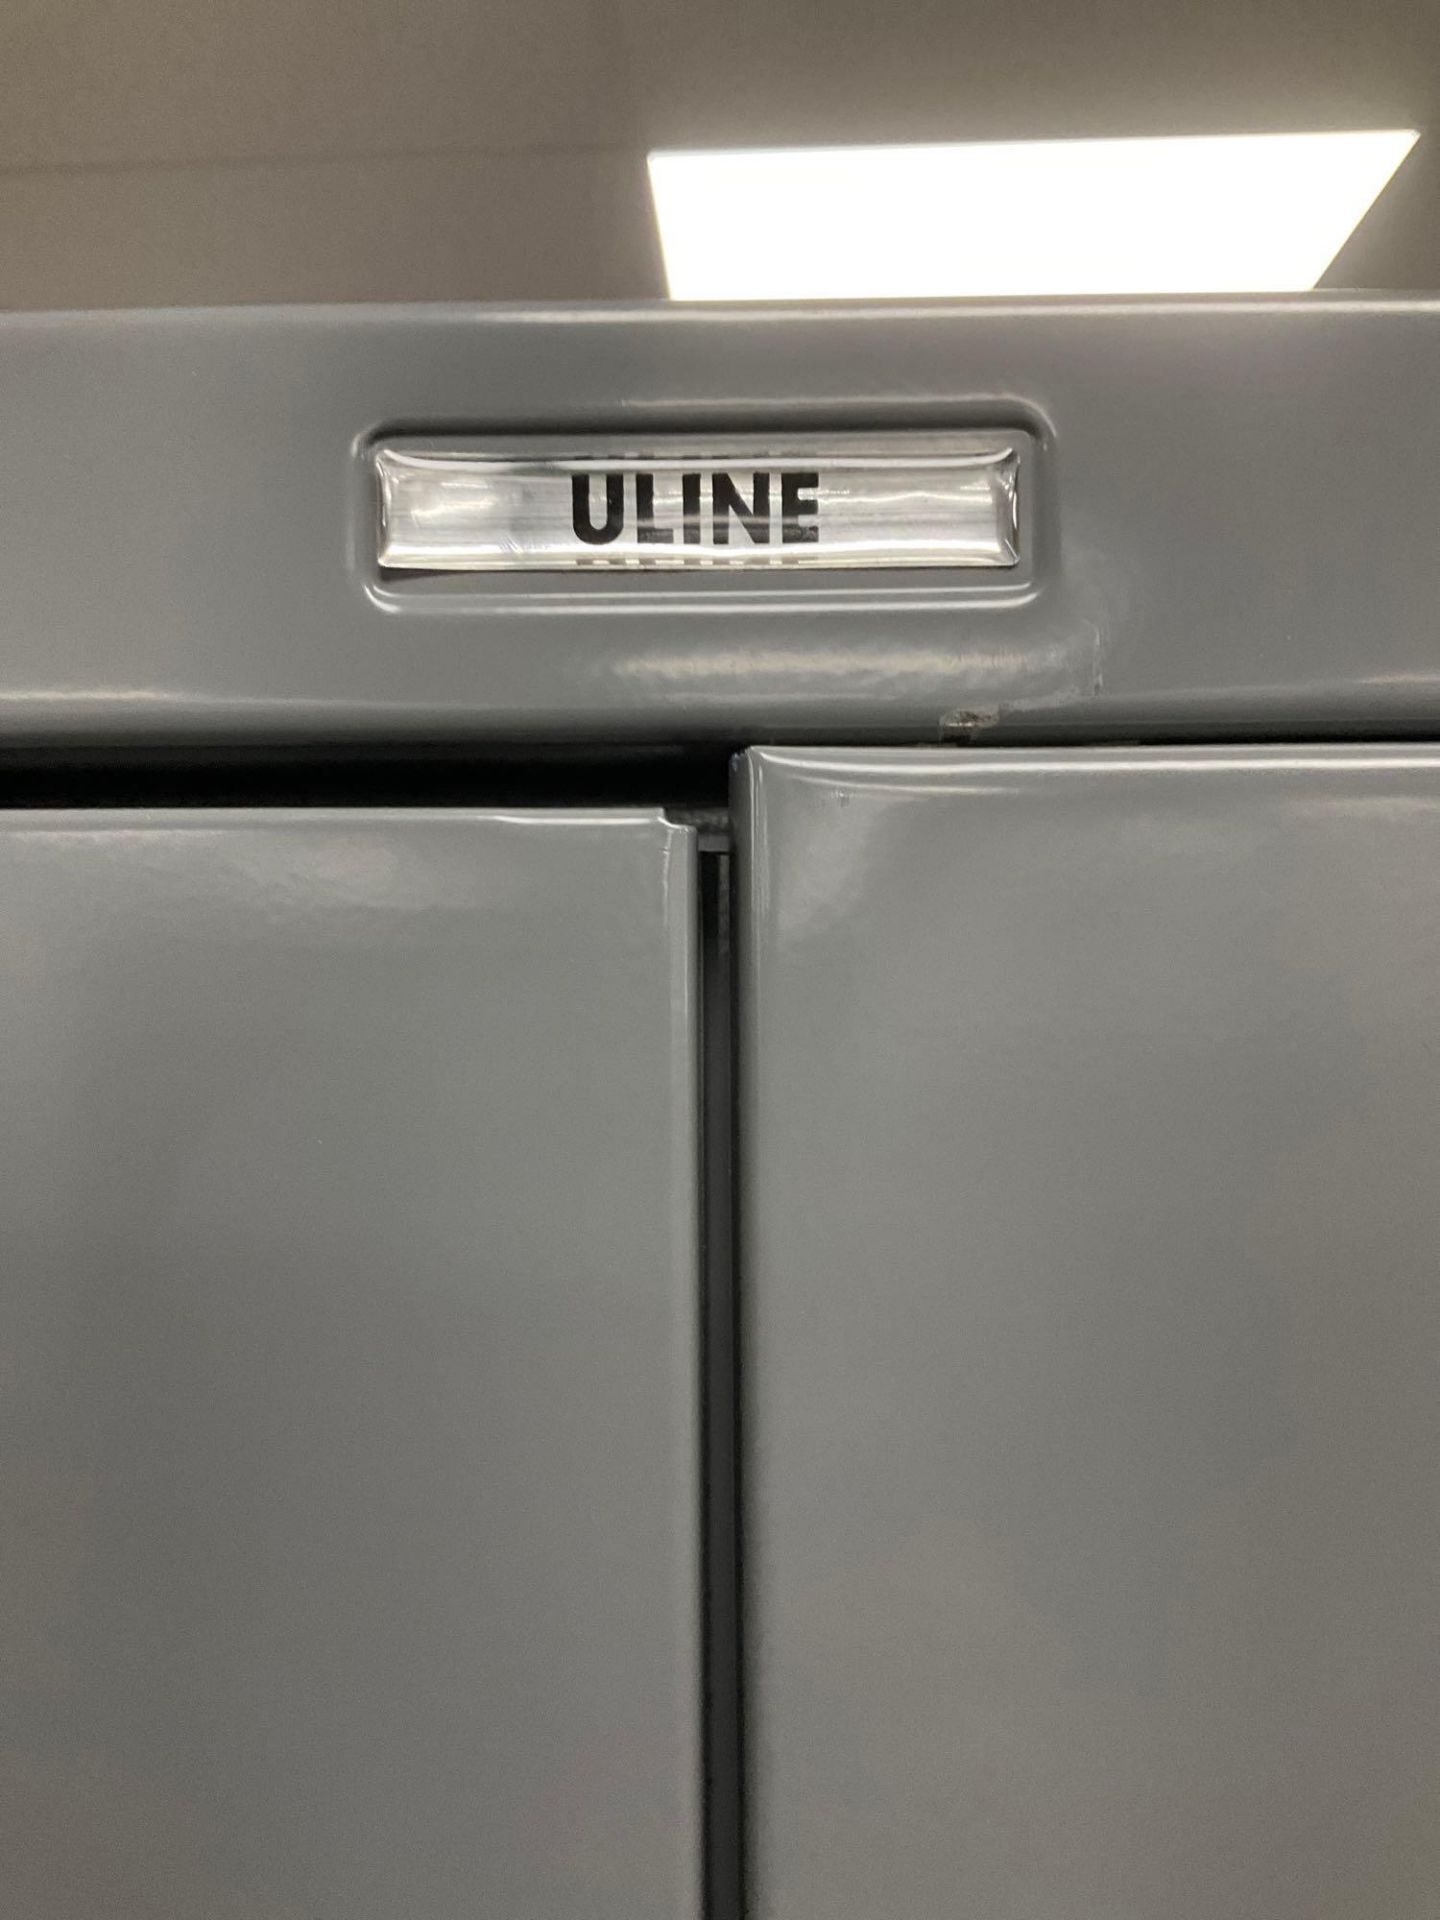 ULINE HEAVY DUTY UTILITY CABINET; APPROXIMATELY 36? L X 18? W X 79 H - Image 2 of 4